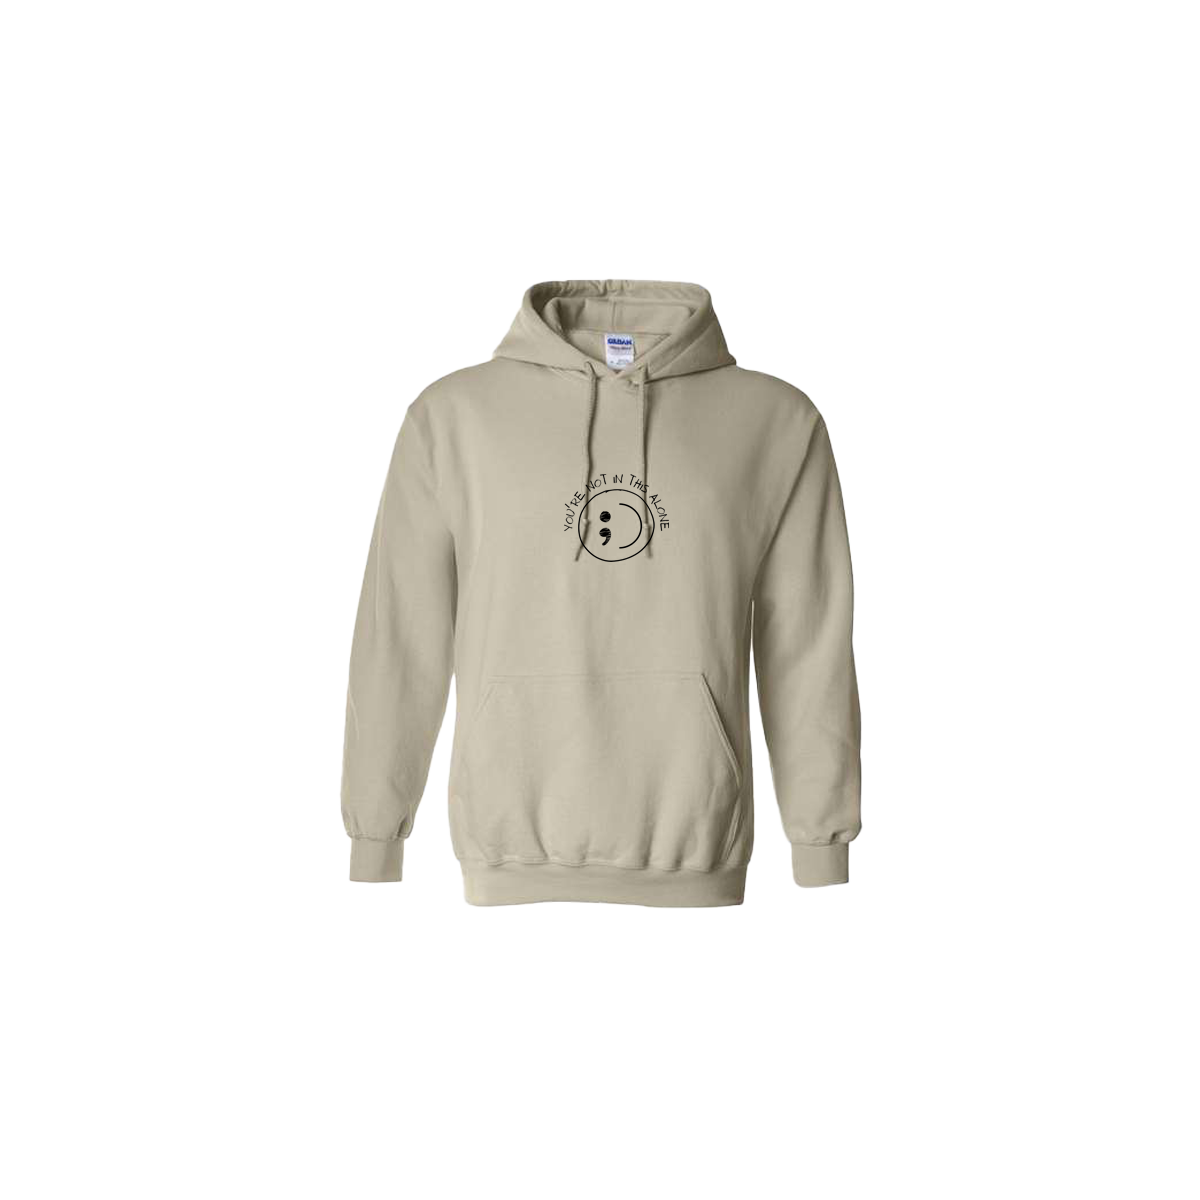 You're Not In This Alone Embroidered Beige Hoodie - Mental Health Awareness Clothing